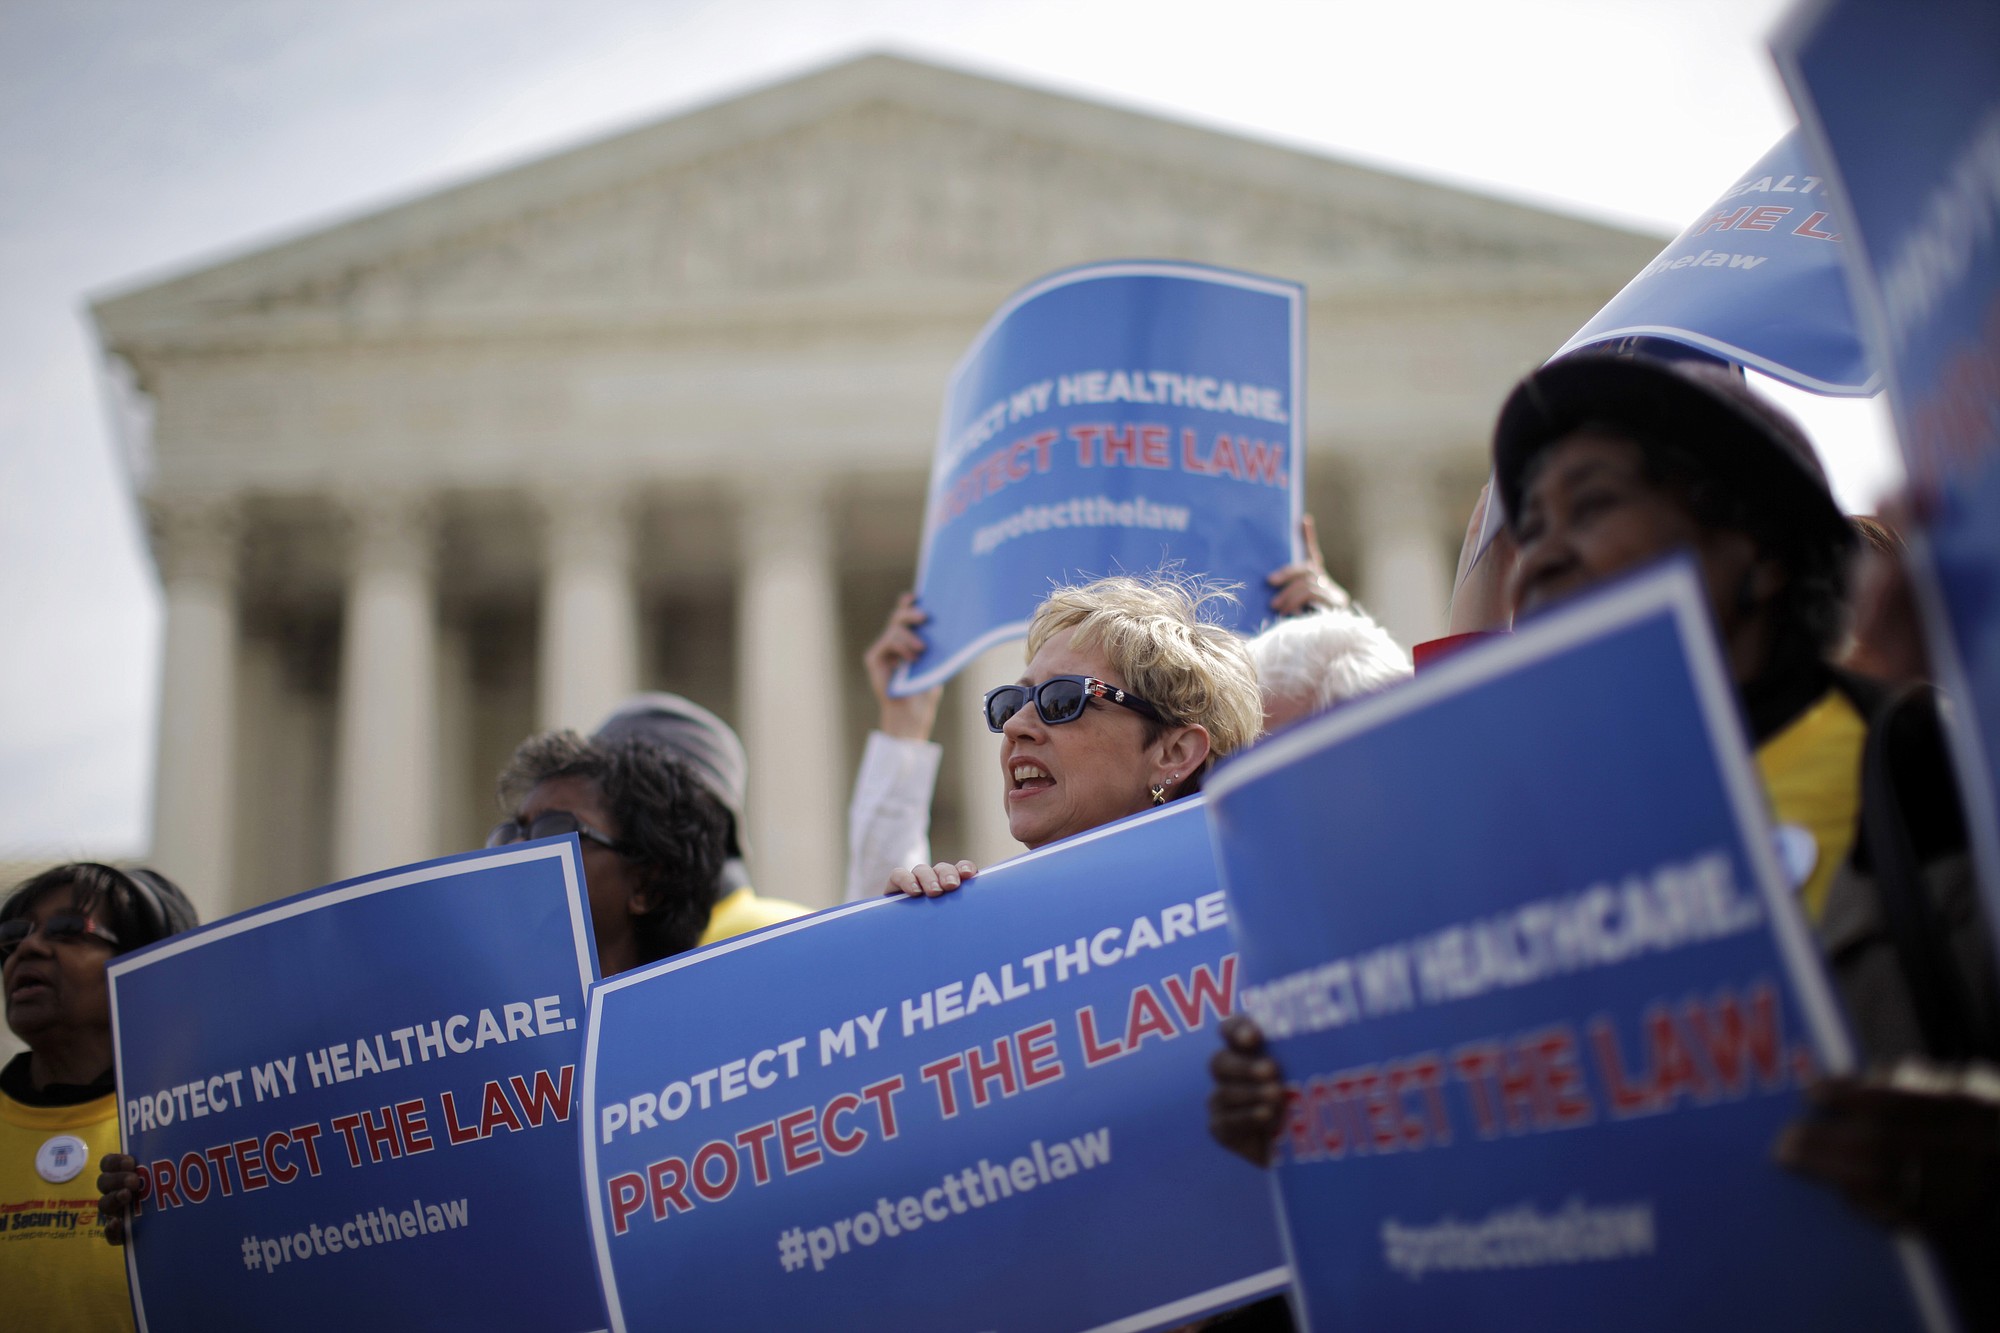 Supporters of health care reform rally in front of the Supreme Court in Washington